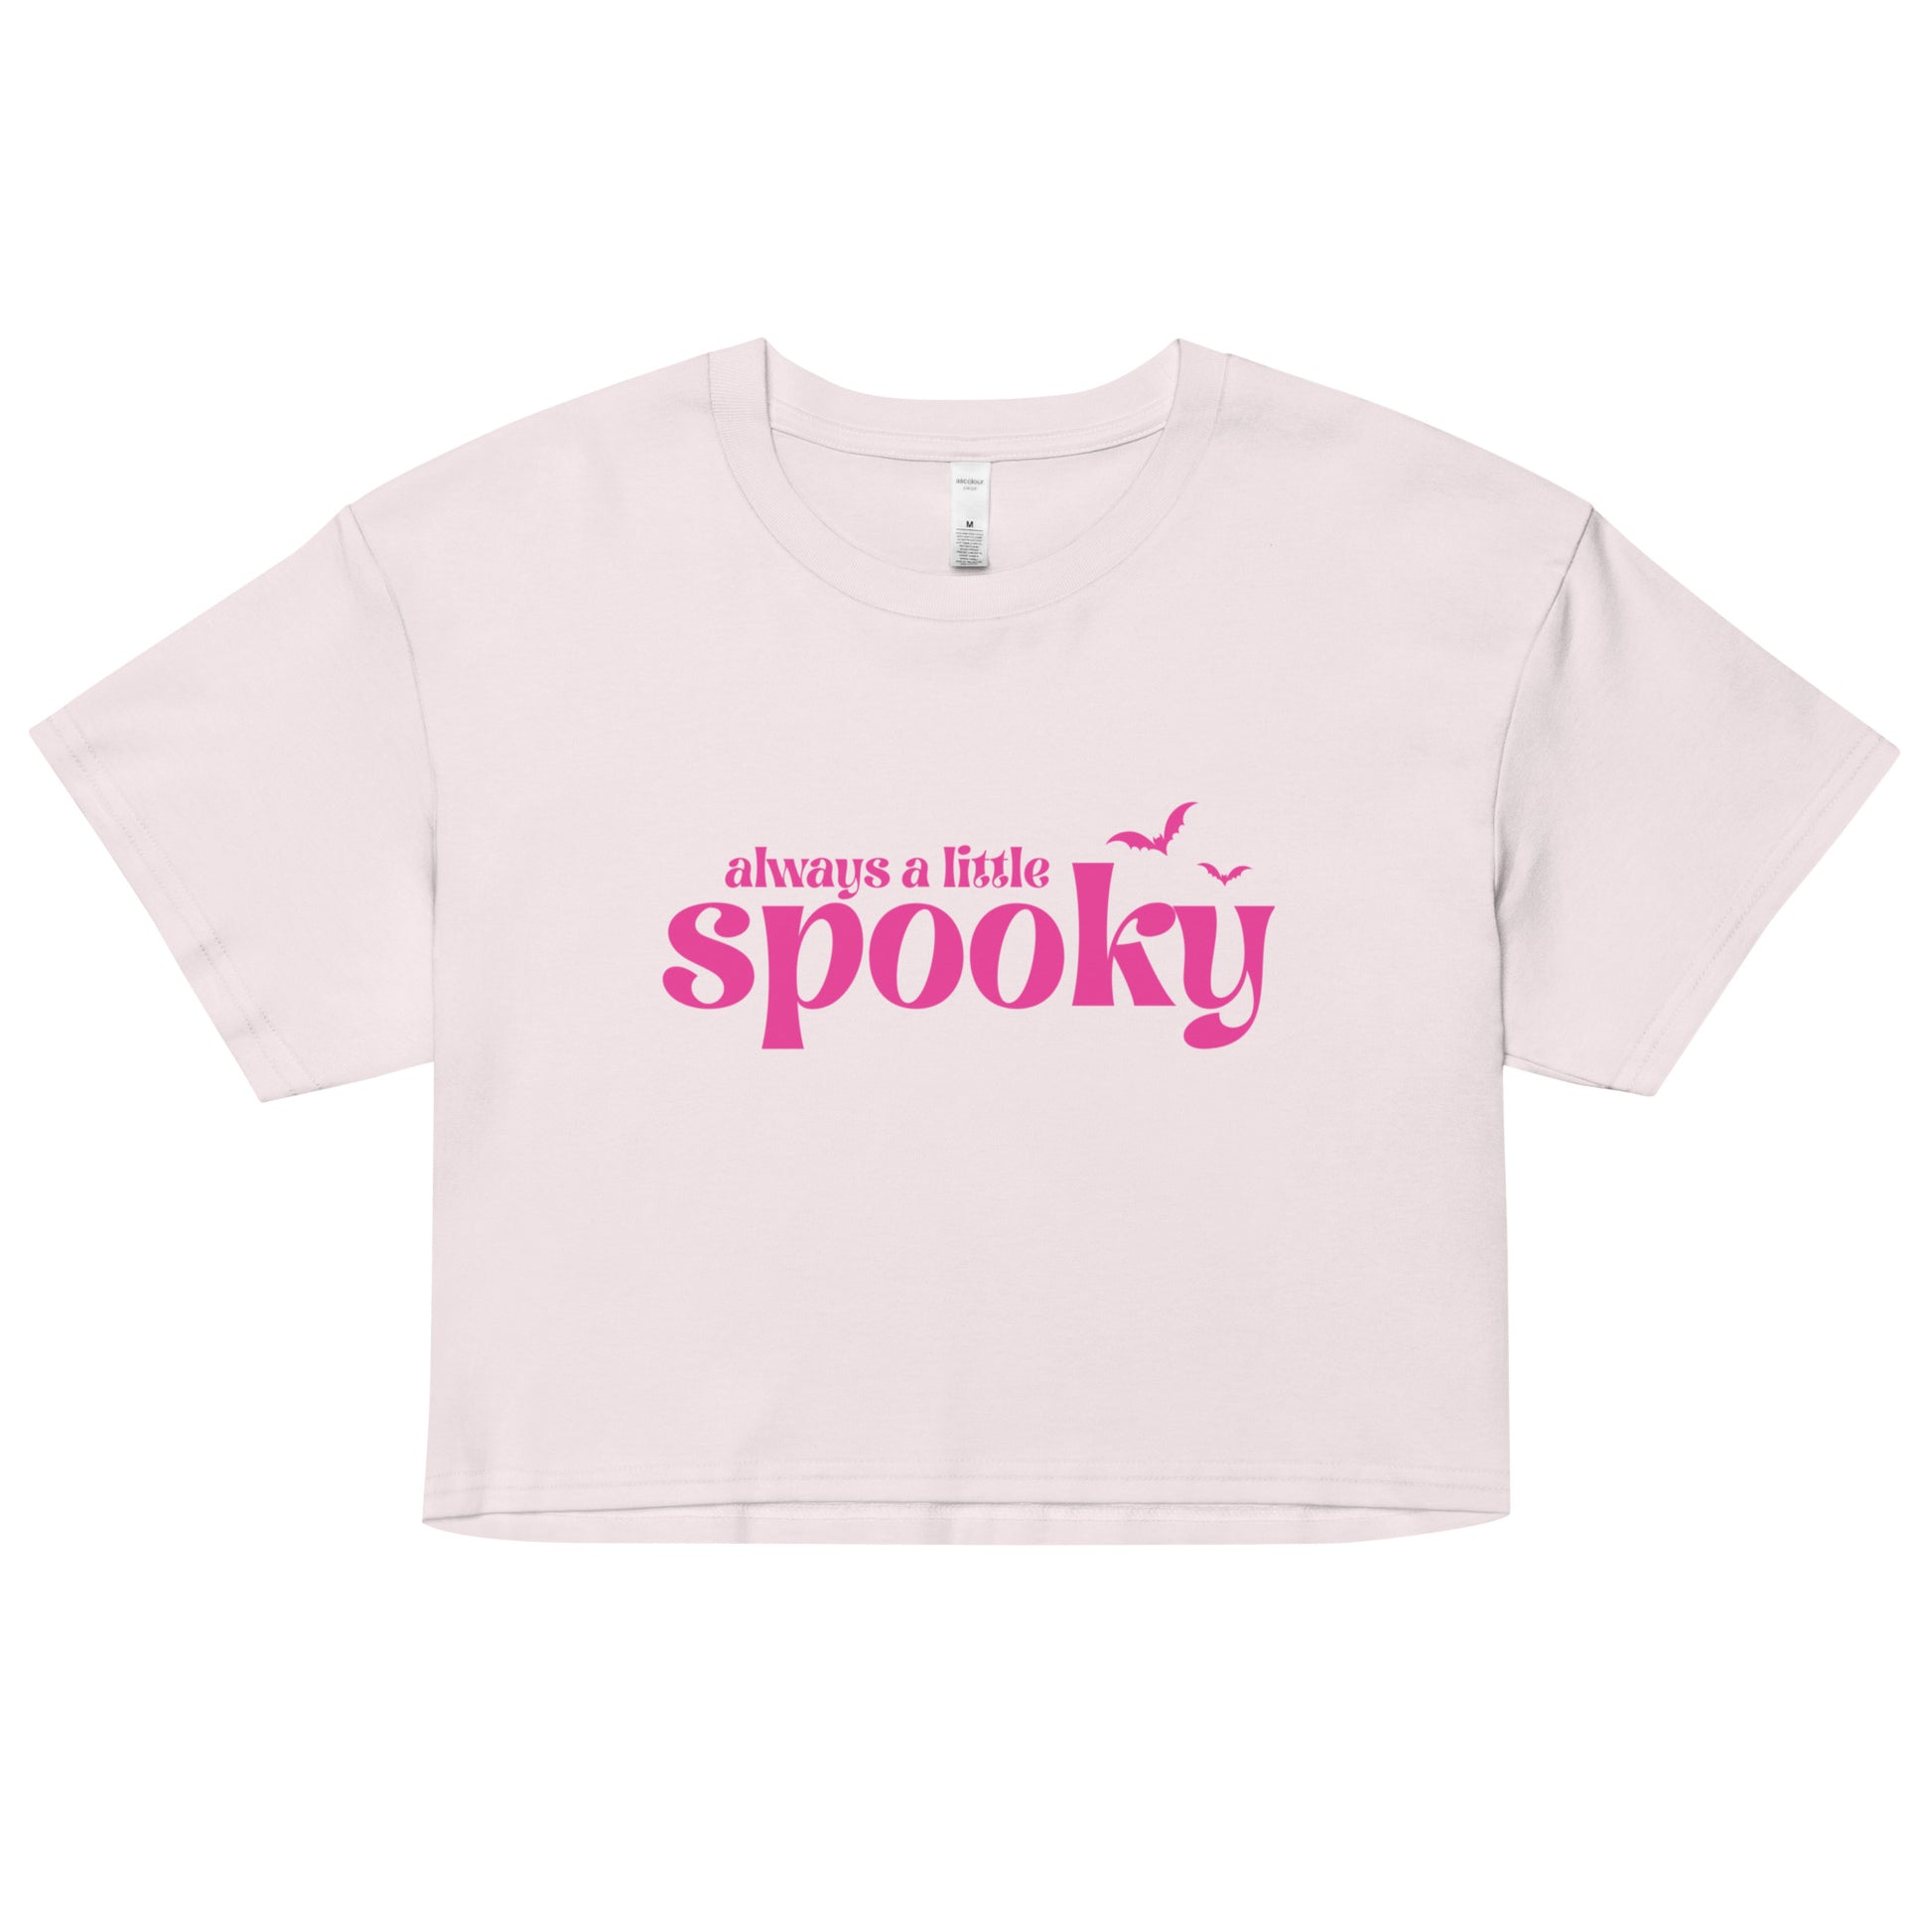 A barely-pink, cropped t-shirt that says "always a little spooky" in a bright pink trendy font